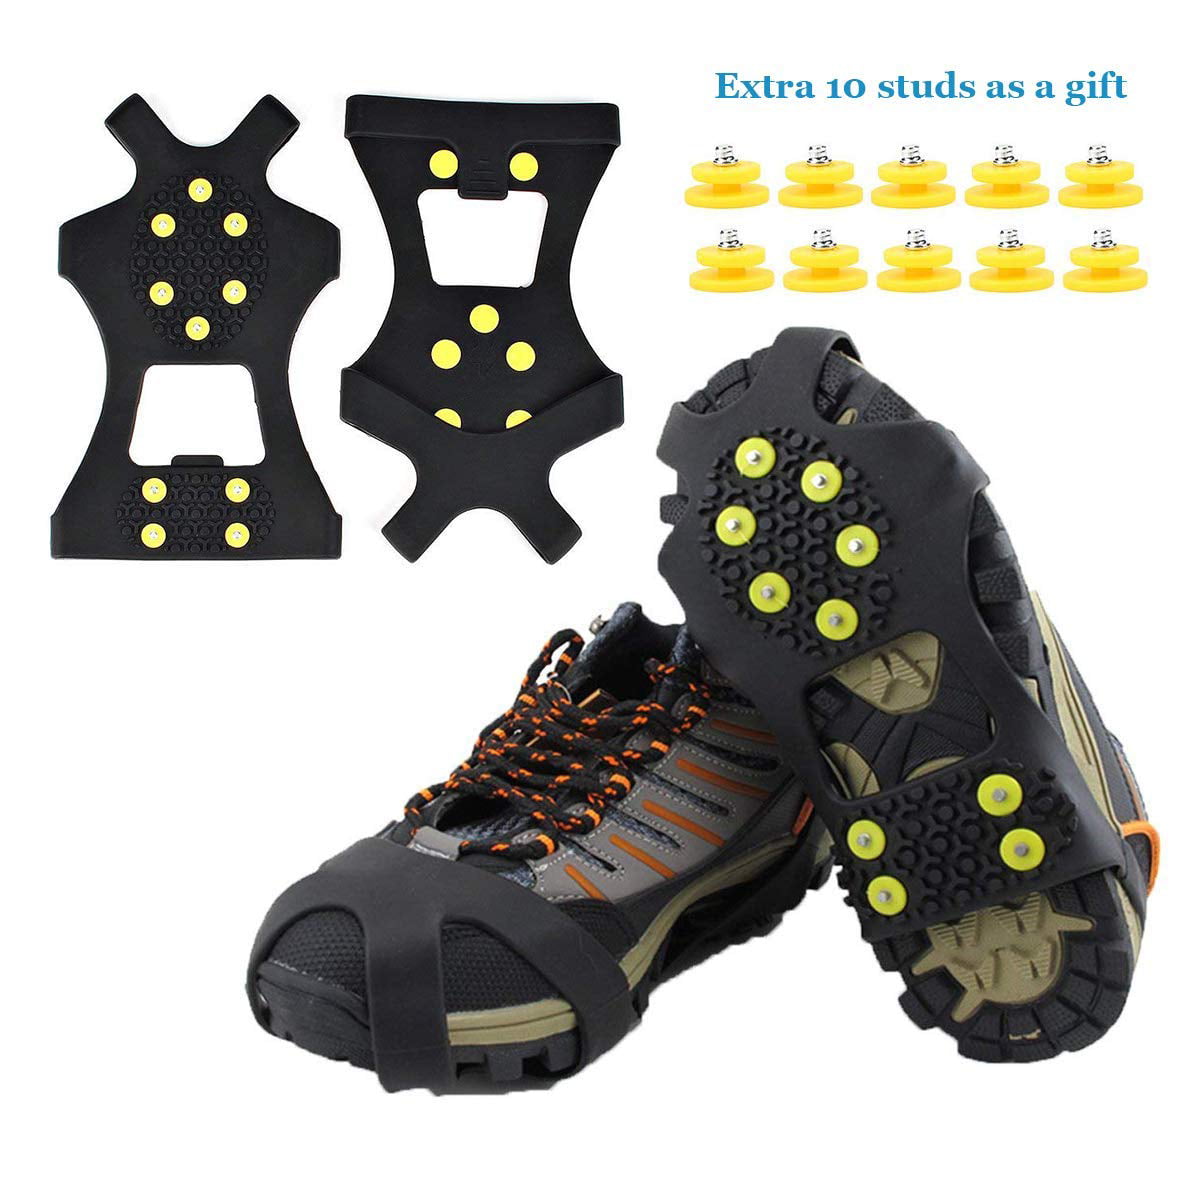 Ice Cleats Over Shoe Boots Anti Slip Traction 10 Studs Crampons Slip-on Stretch